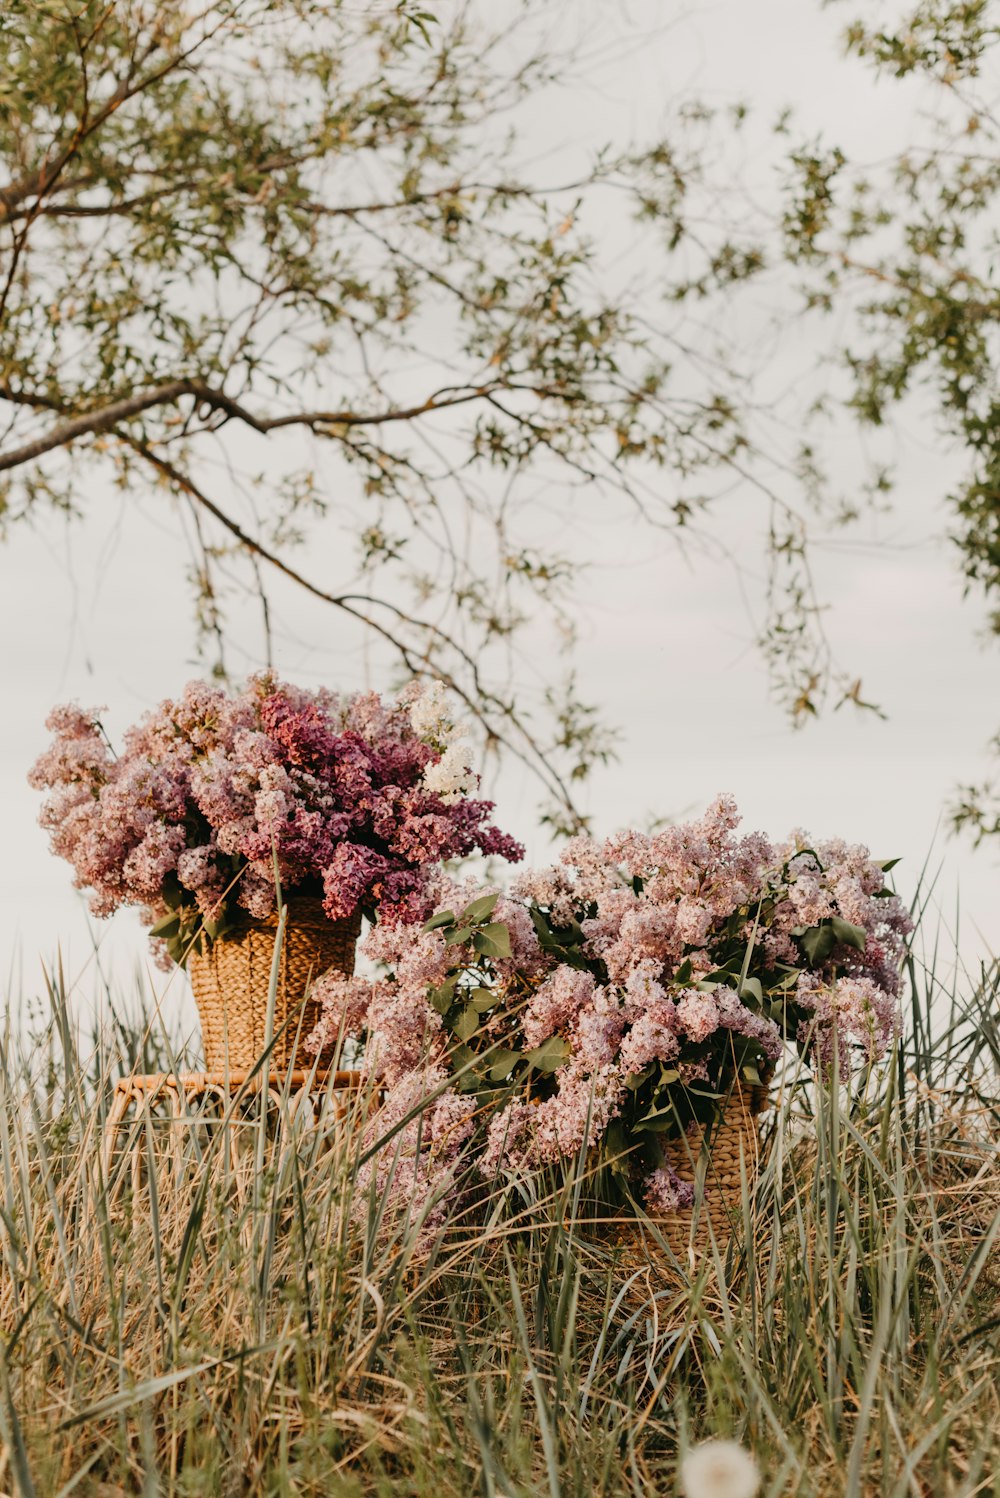 a basket full of flowers sitting in the grass